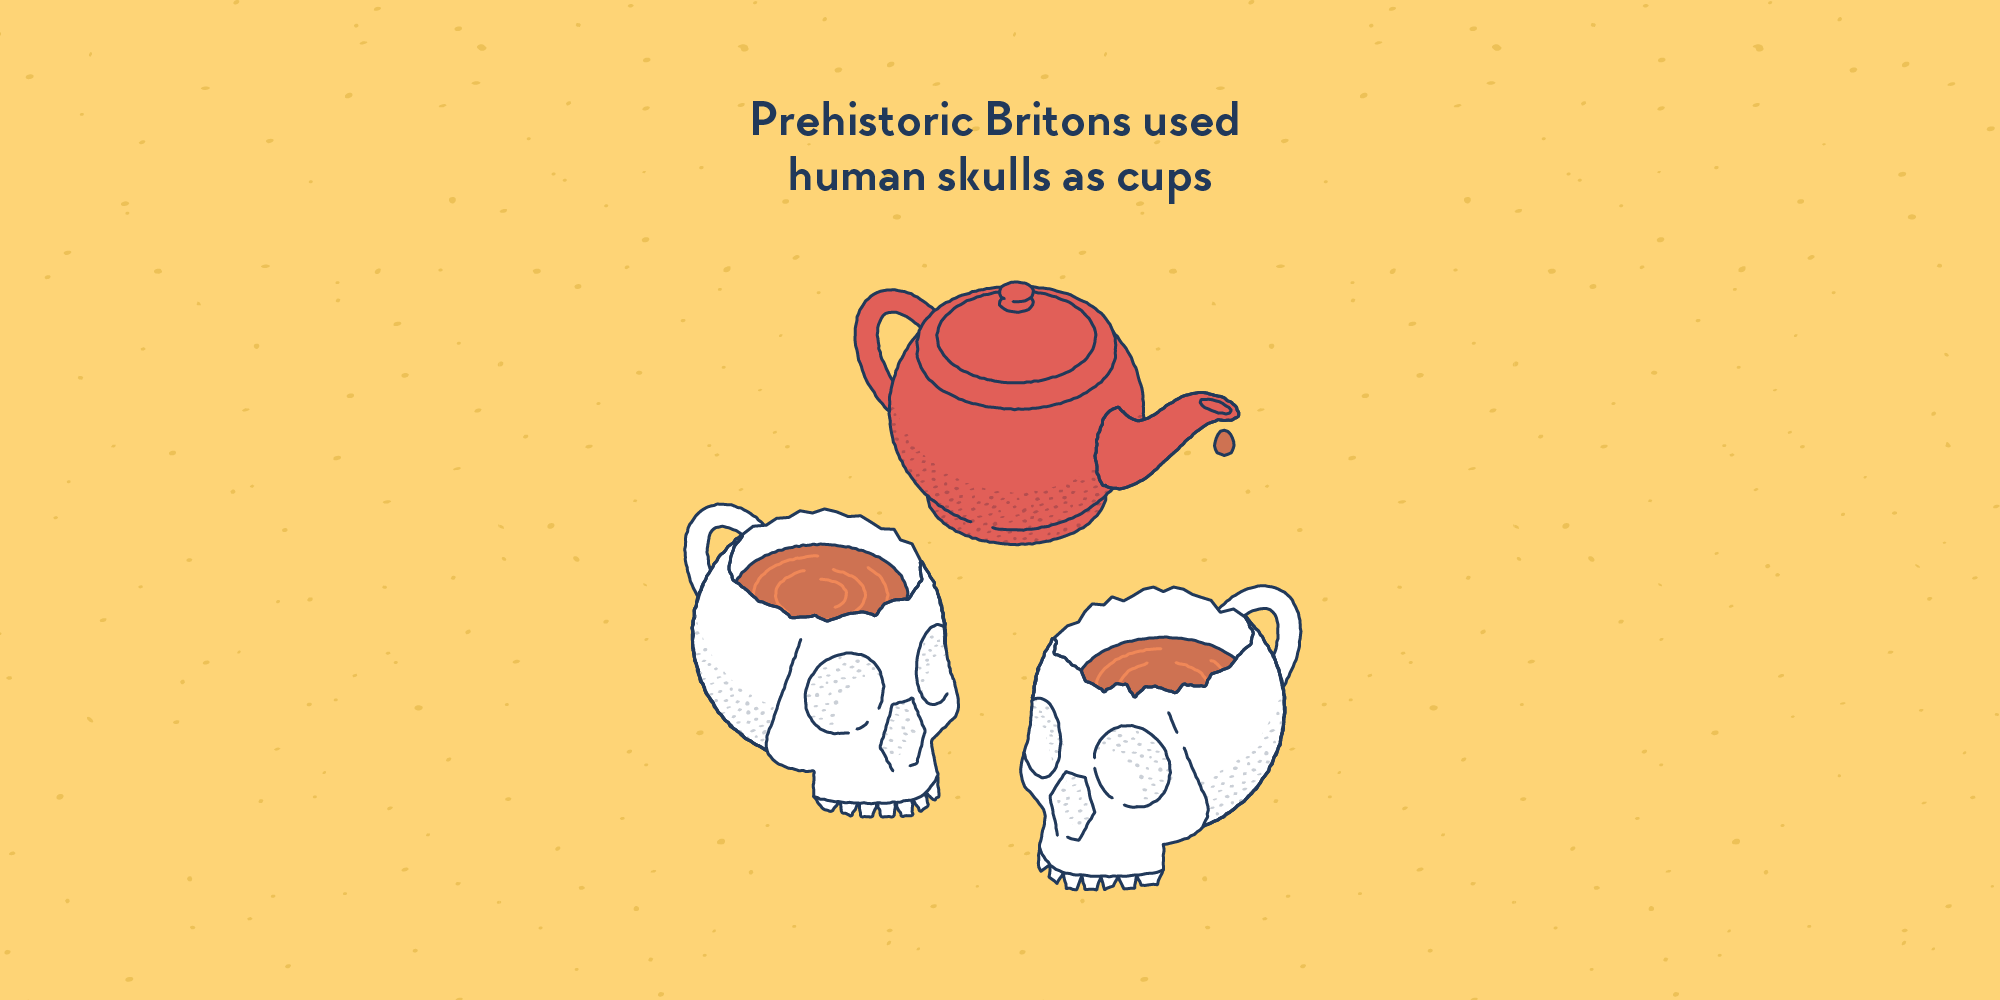 Two human skulls cracked at the top and filled with hot tea, placed next to a tea pot